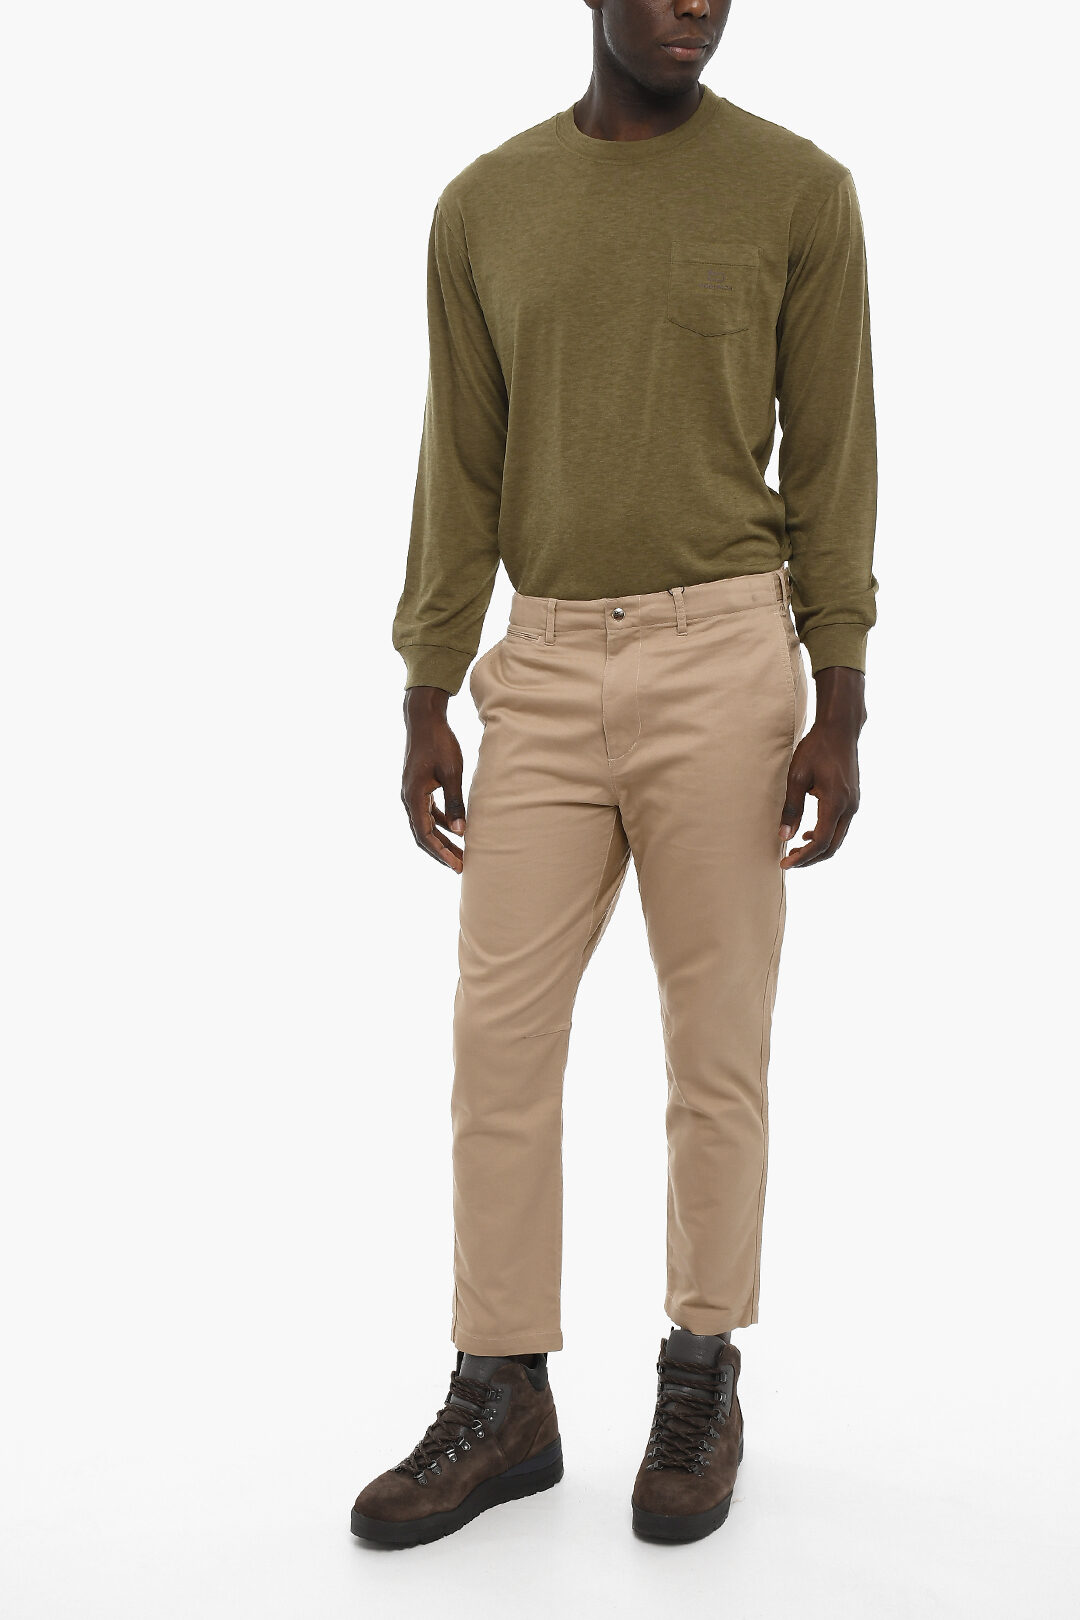 Woolrich Cotton Blend Tapered Fit Chino Pants men - Glamood